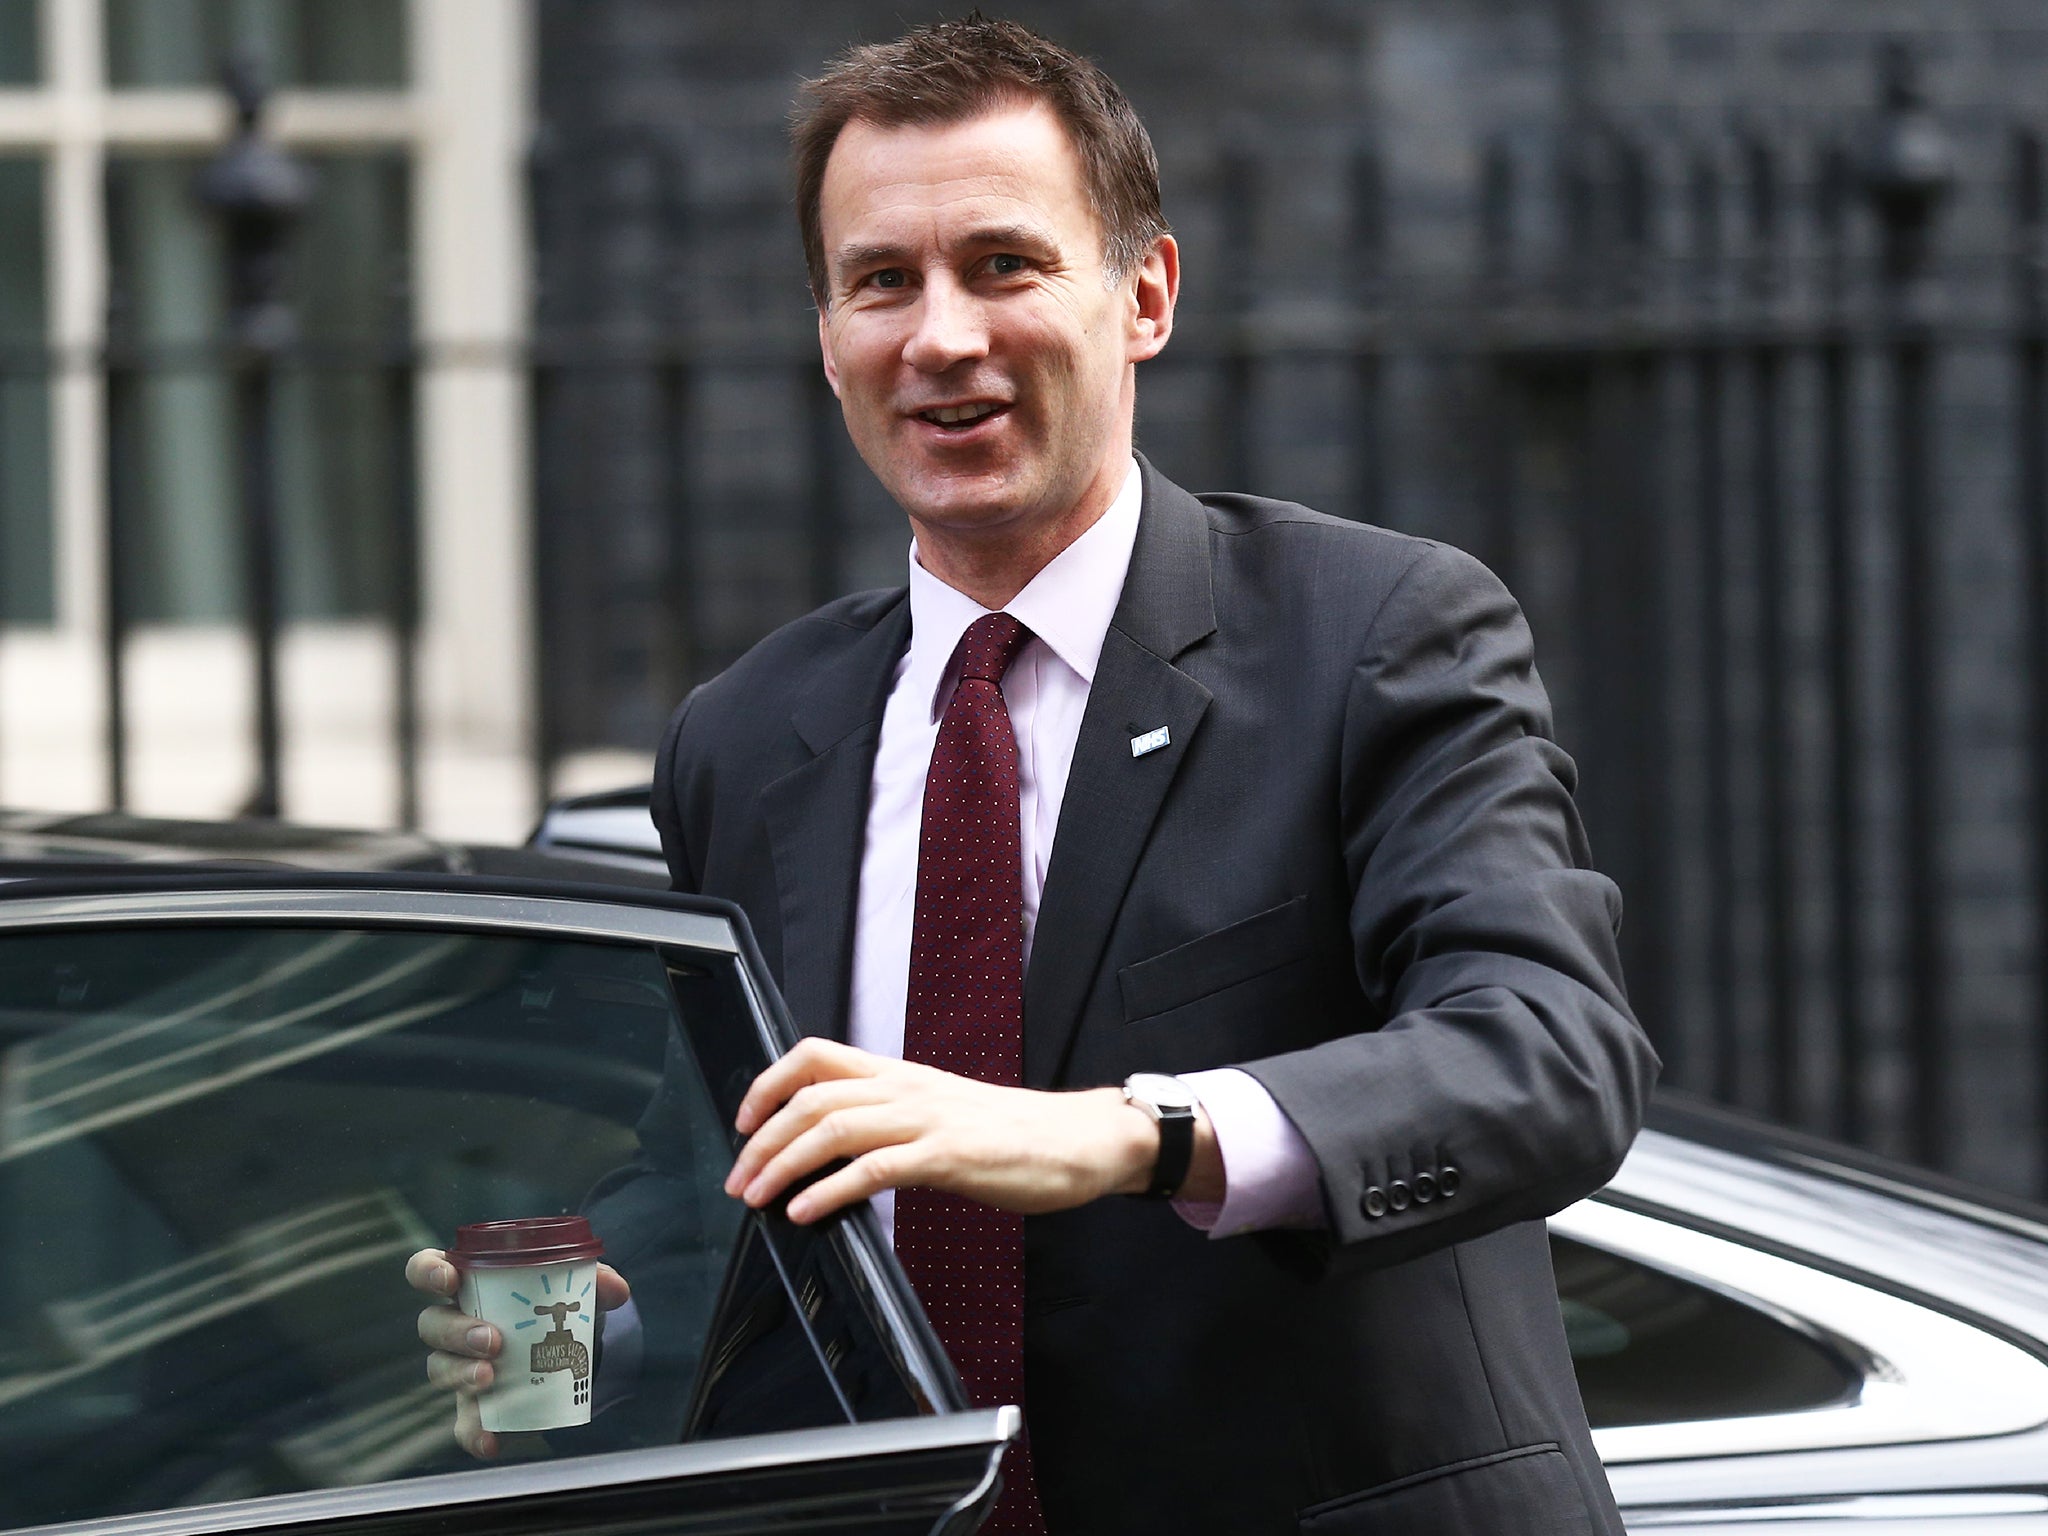 Health Secretary Jeremy Hunt said the deal 'represents a definitive step forward' for the NHS